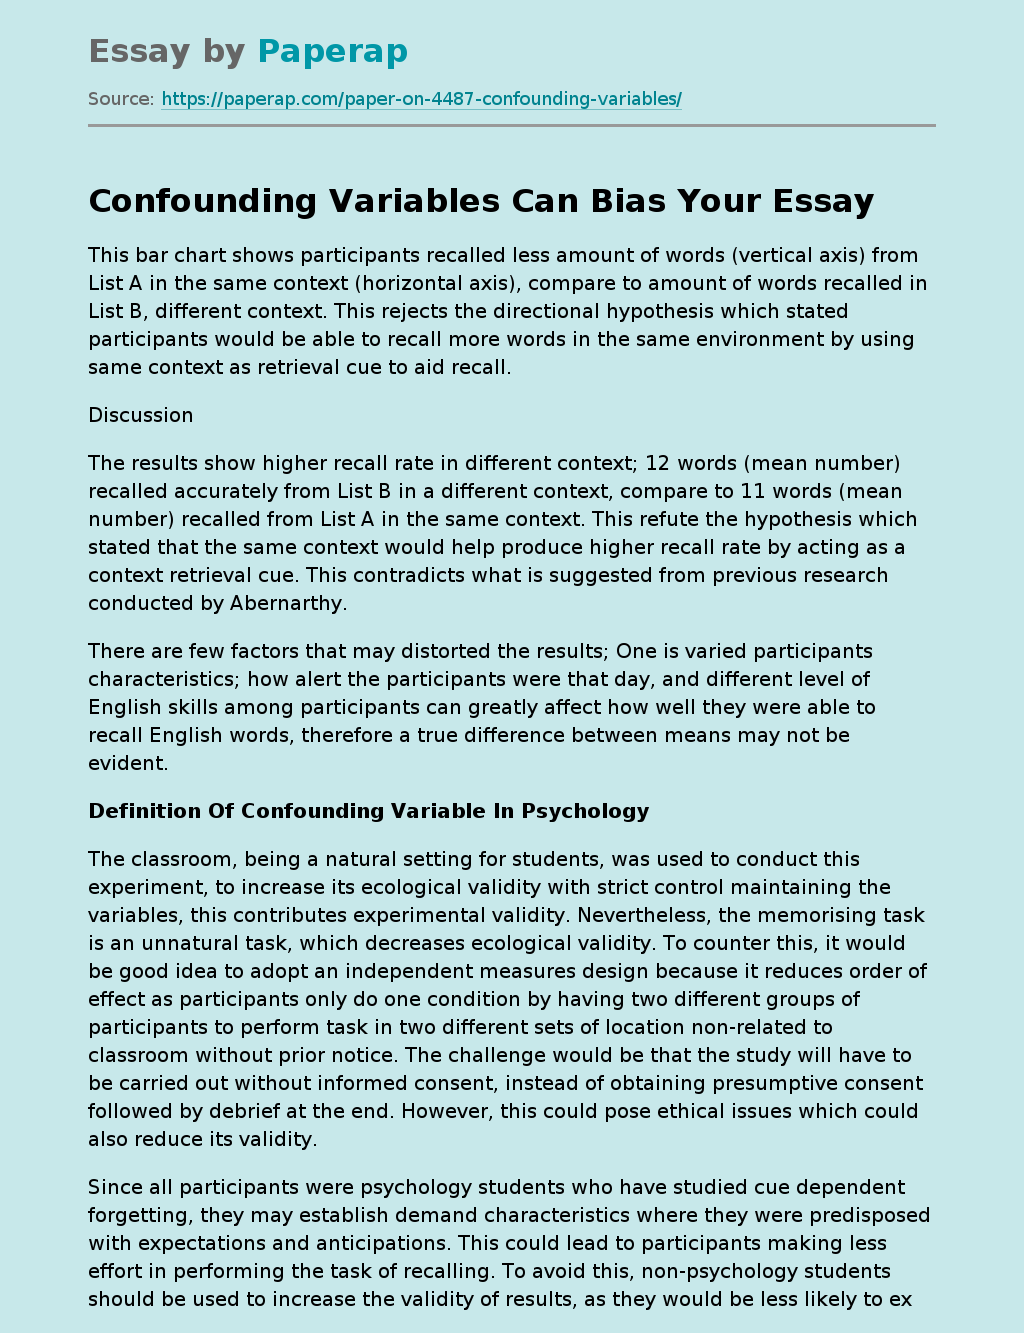 Confounding Variables Can Bias Your